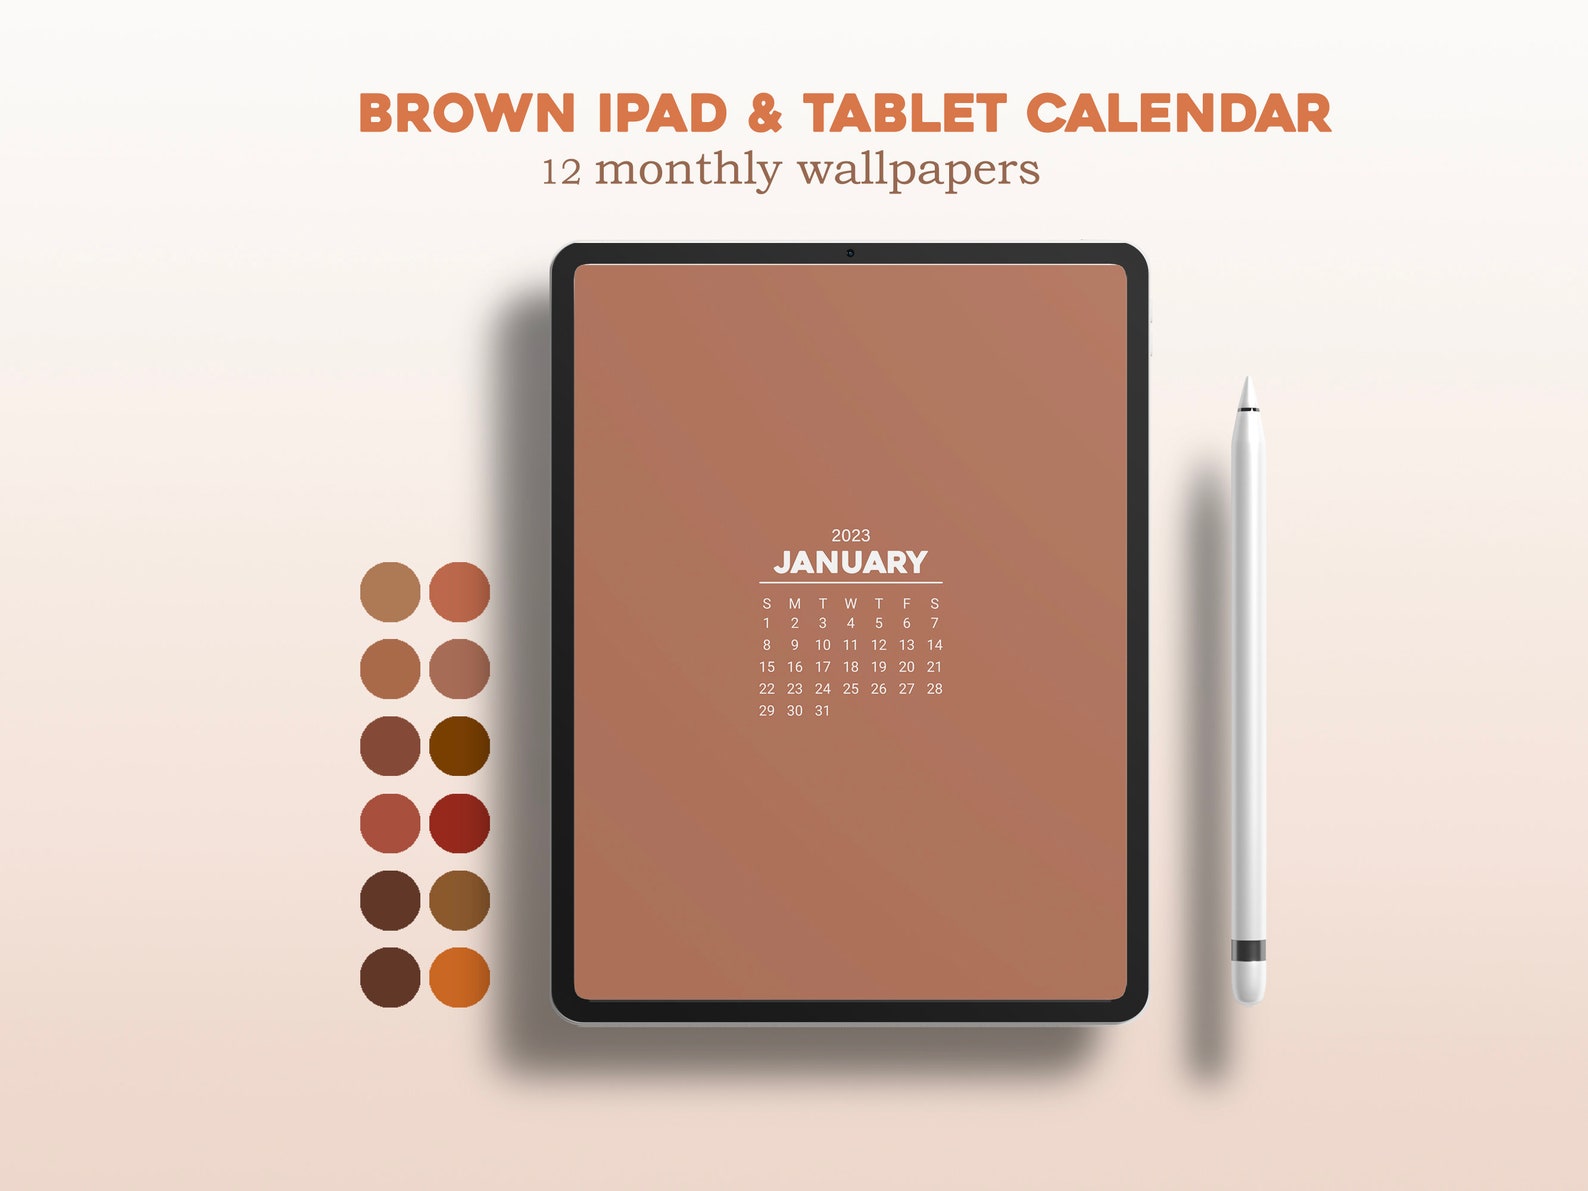 Agauo on minimalist brown digital calendar wallpaper for ipad and tablet aesthetic brown calendar monthly calendar start sunday tablet digital minimalist brown monthly calendar aestheticbrowncalendar wallpaper start